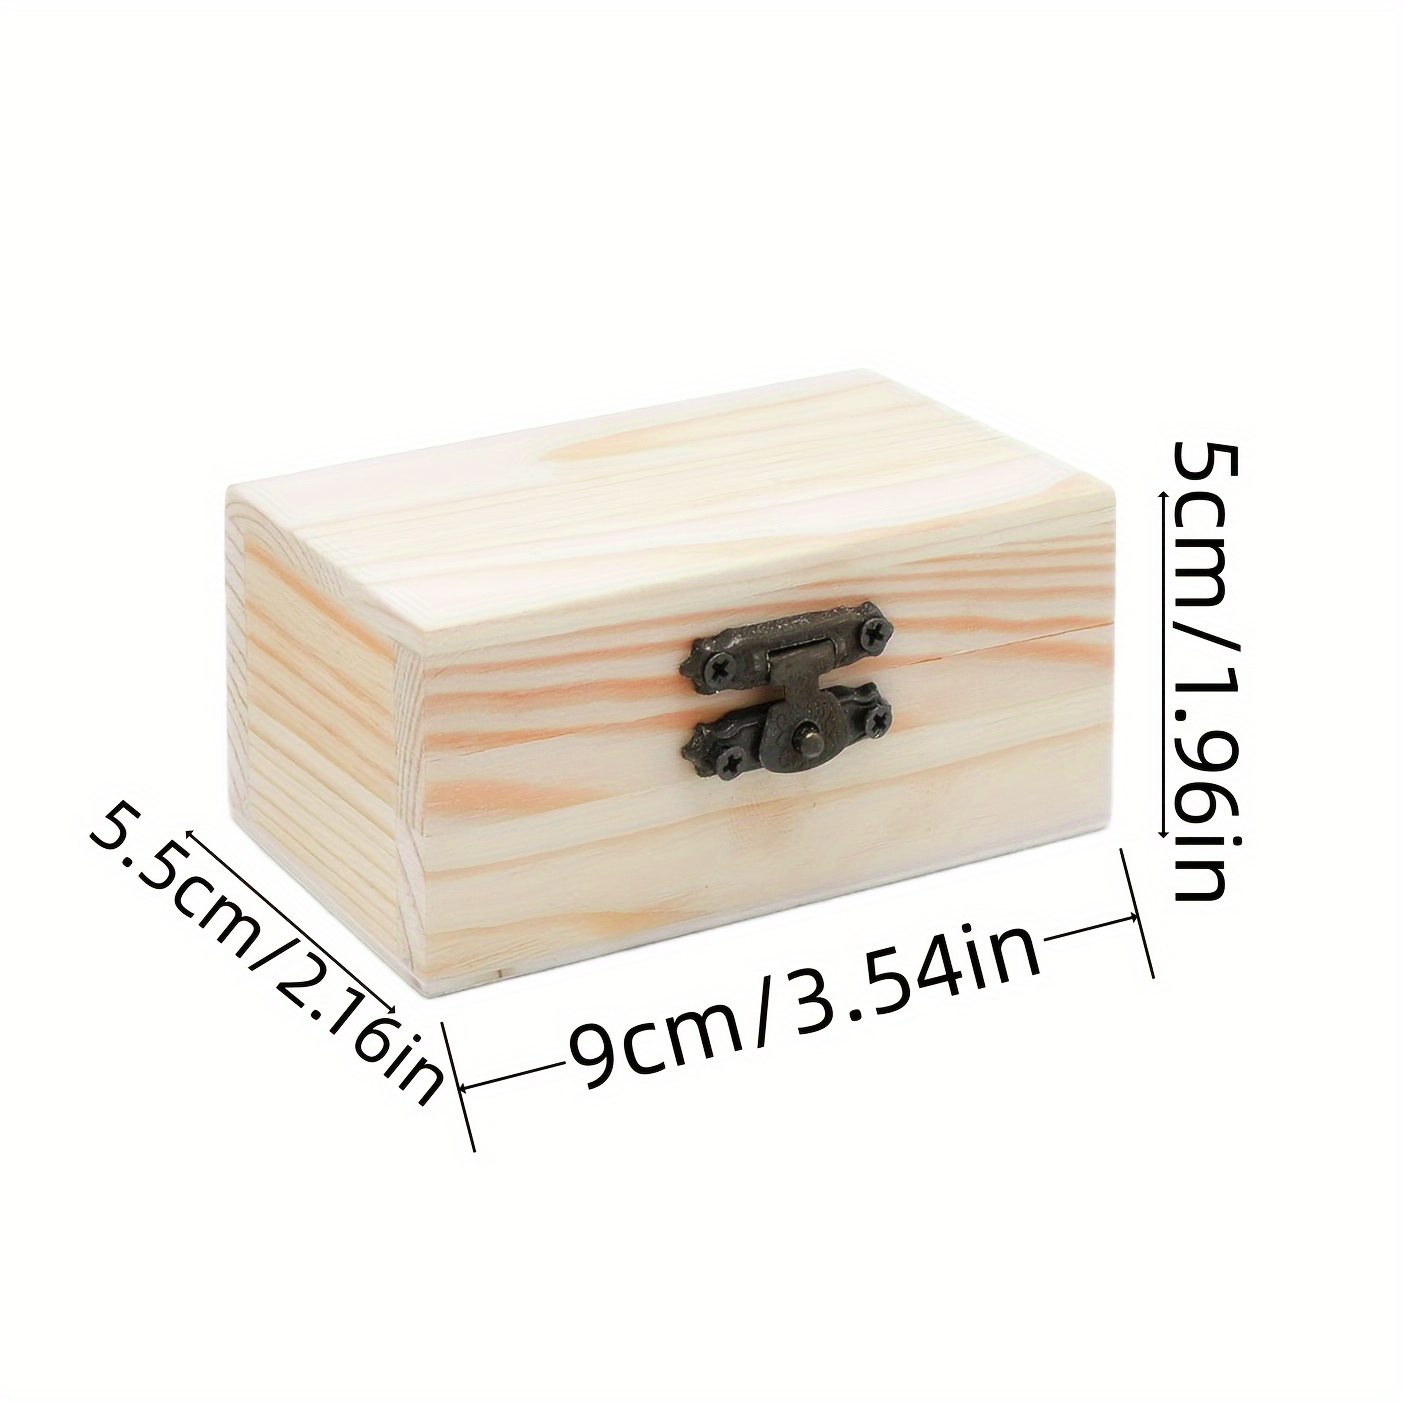 1pc Unpainted Wood Box - Treasure Chest Small Wooden Box With Hinged Lid -  Art Hobbies Jewelry Box - 3.54x2.16x1.96in